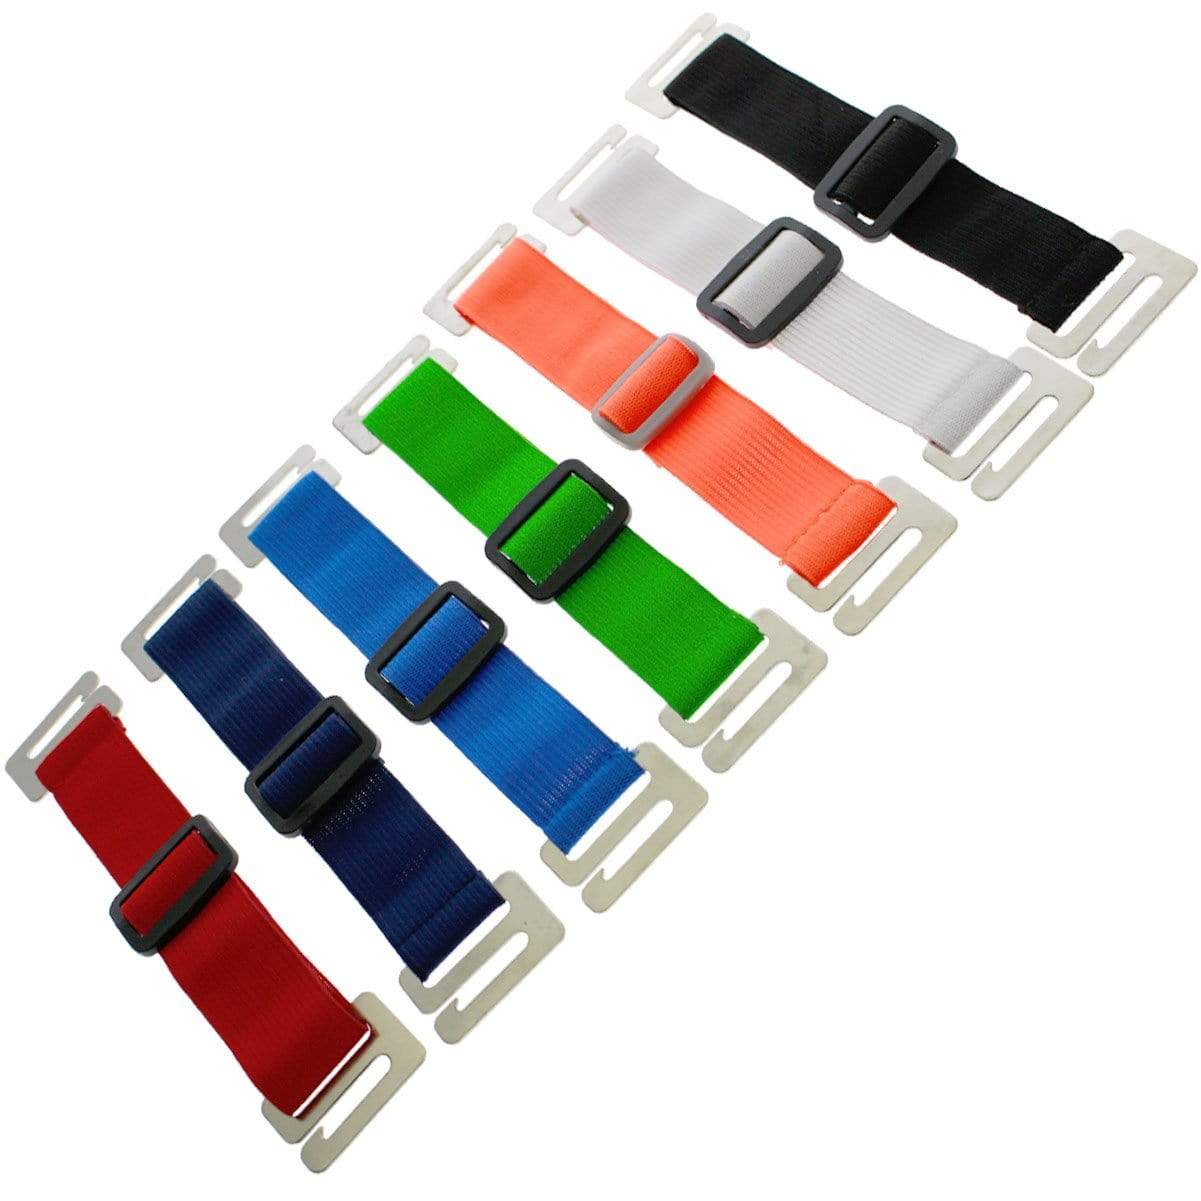 Seven Clear Over Size Vinyl Horizontal Arm Band Badge Holders (P/N 1840-7100) with plastic buckles, reminiscent of armband badge holders, are arranged in a row. The colors include red, dark blue, blue, green, orange, white, and black.